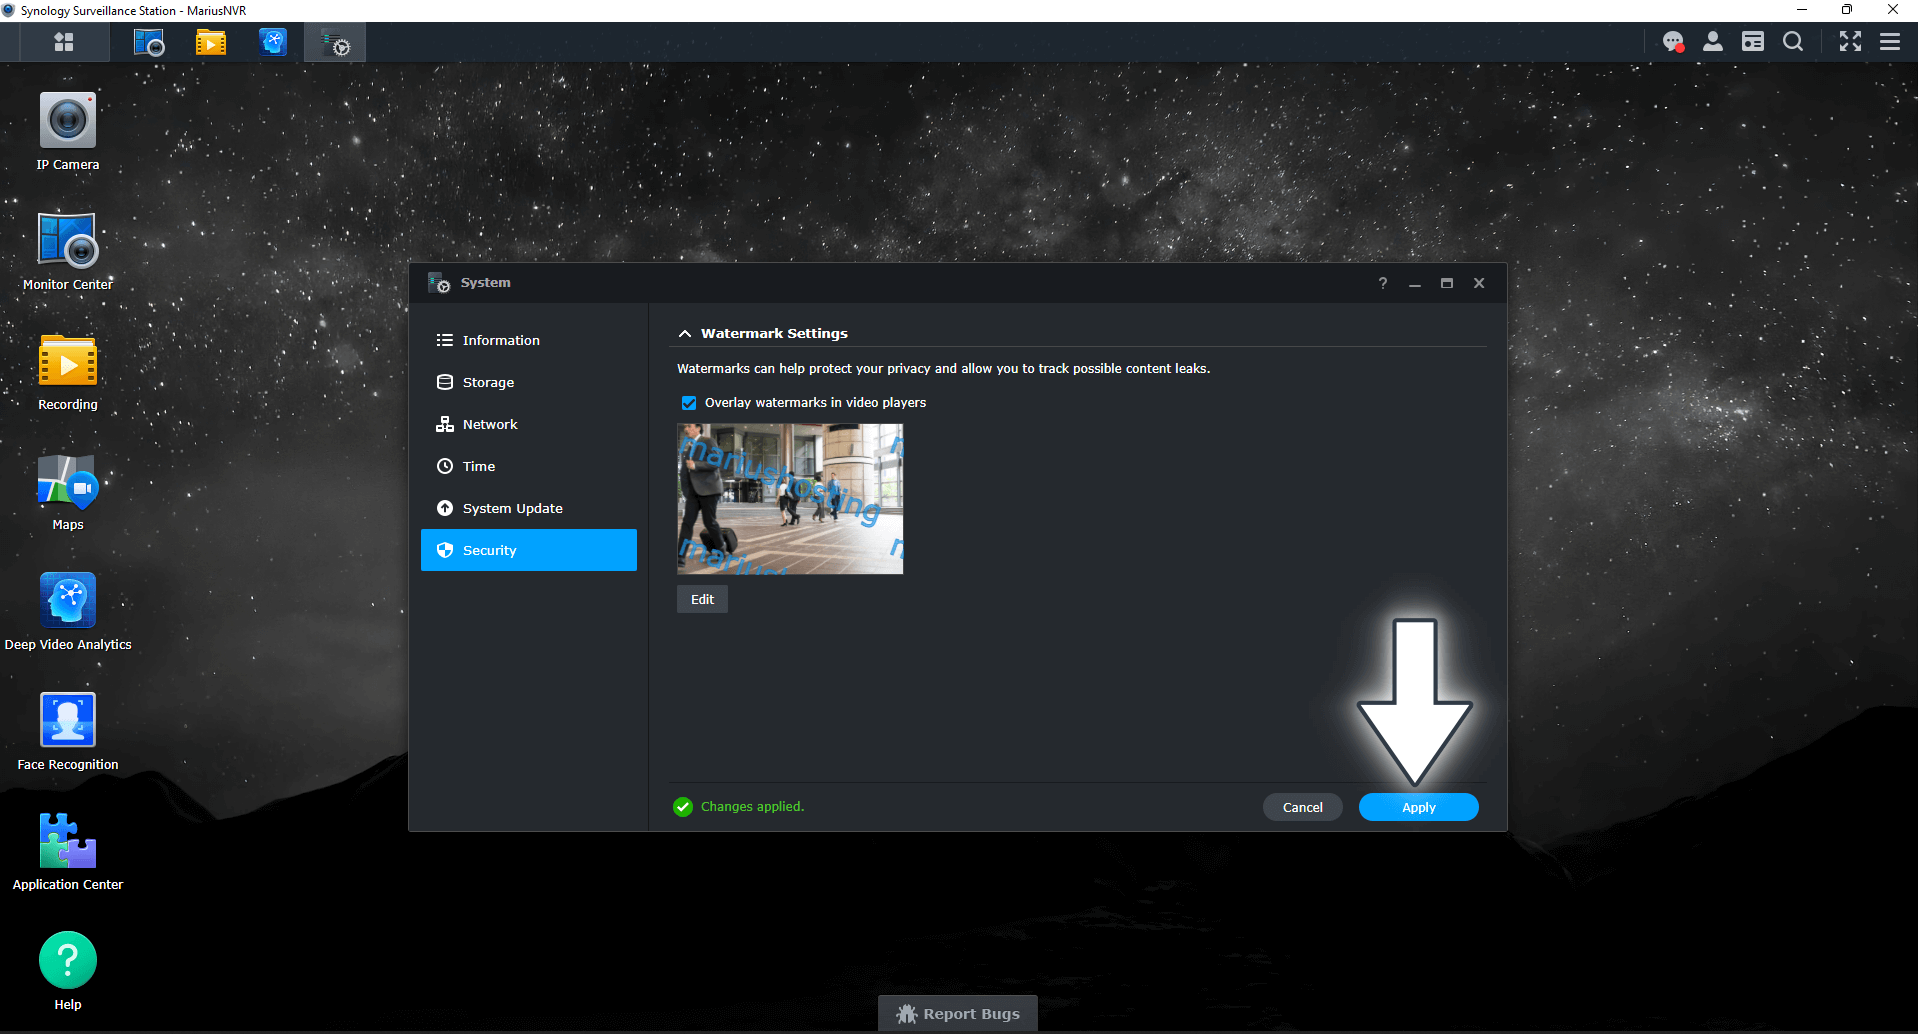 4 Synology Surveillance Station Add Watermark in Live Camera Feed